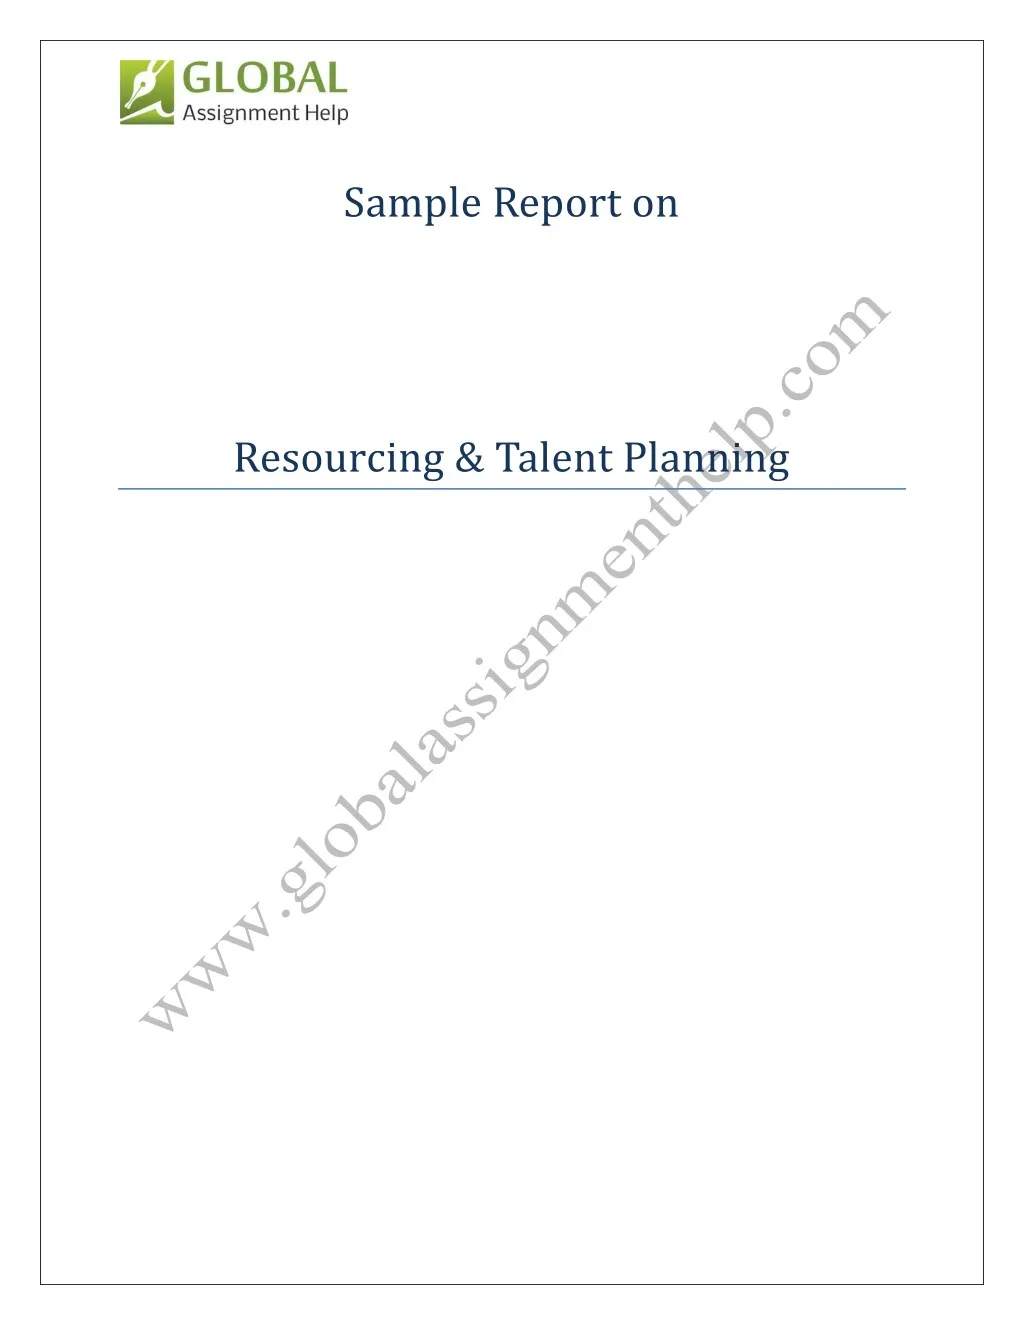 sample report on resourcing talent planning